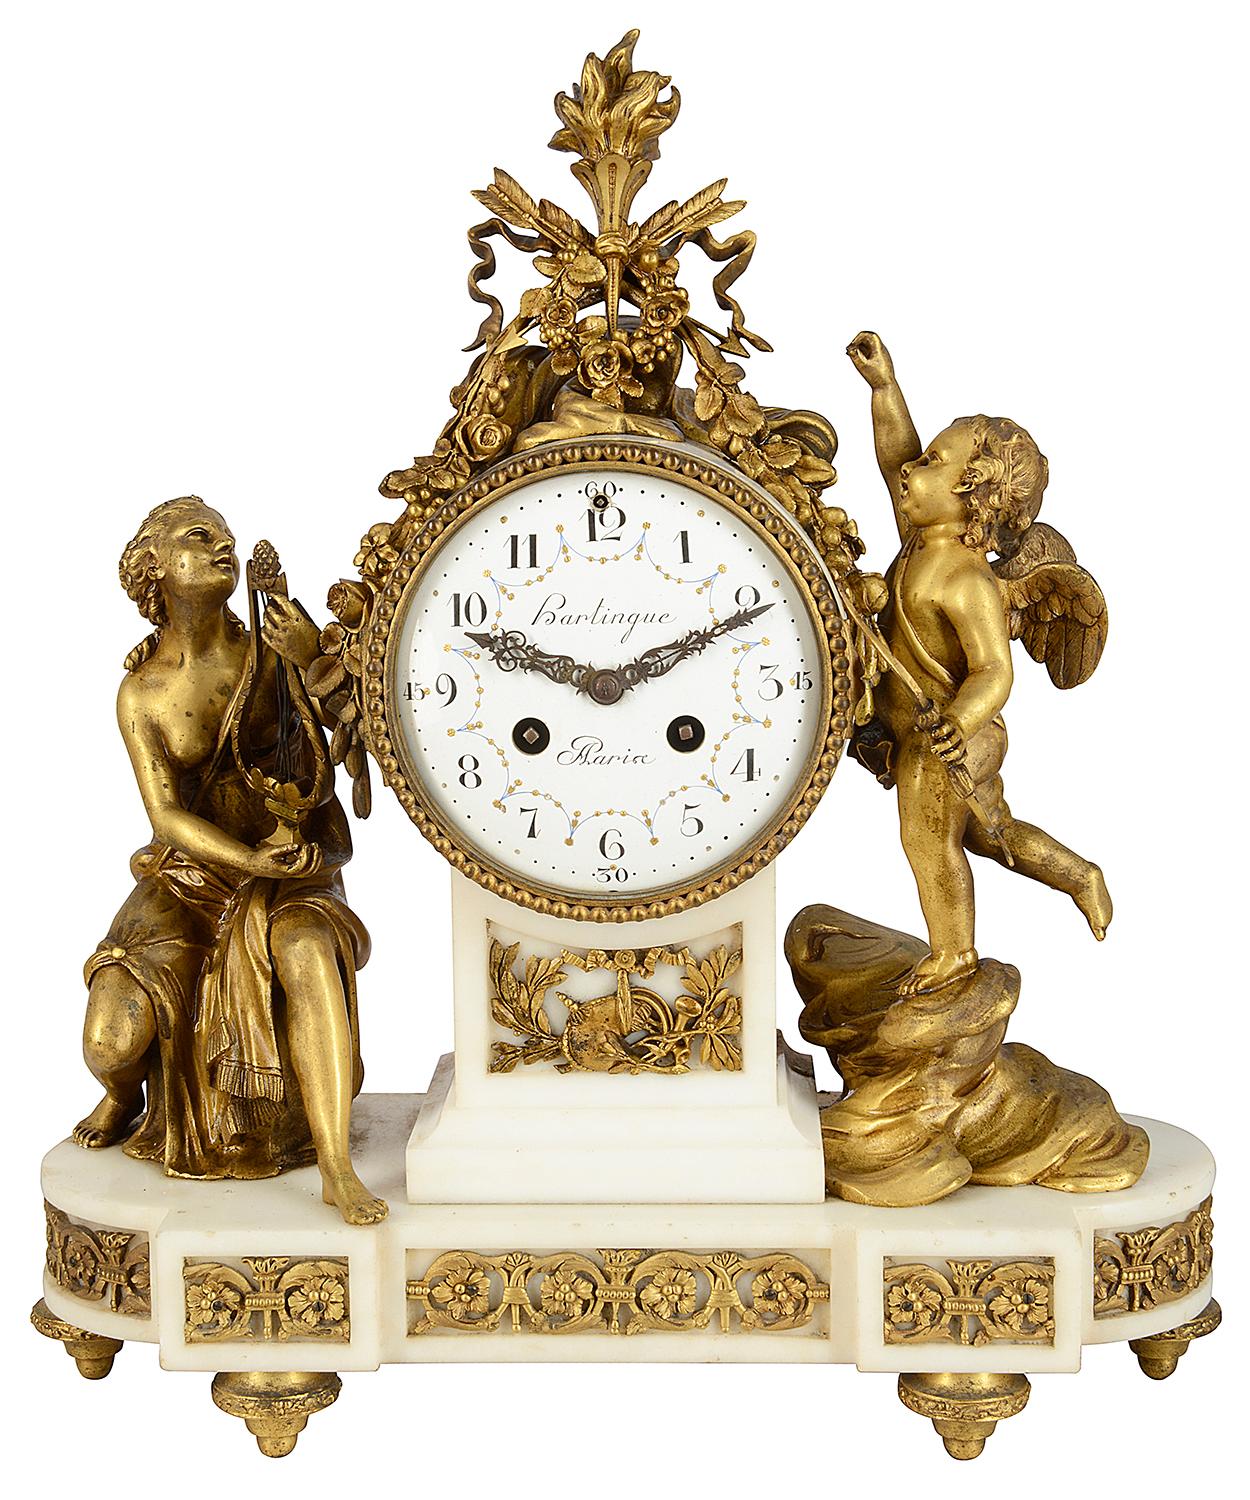 A very good quality classical 19th century French gilded Ormolu mantel clock set, with a flame, arrows and ribbons above a white enamel clock face, an eight day duration chiming clock movement. A seated semi nude maiden playing a harp and a cupid